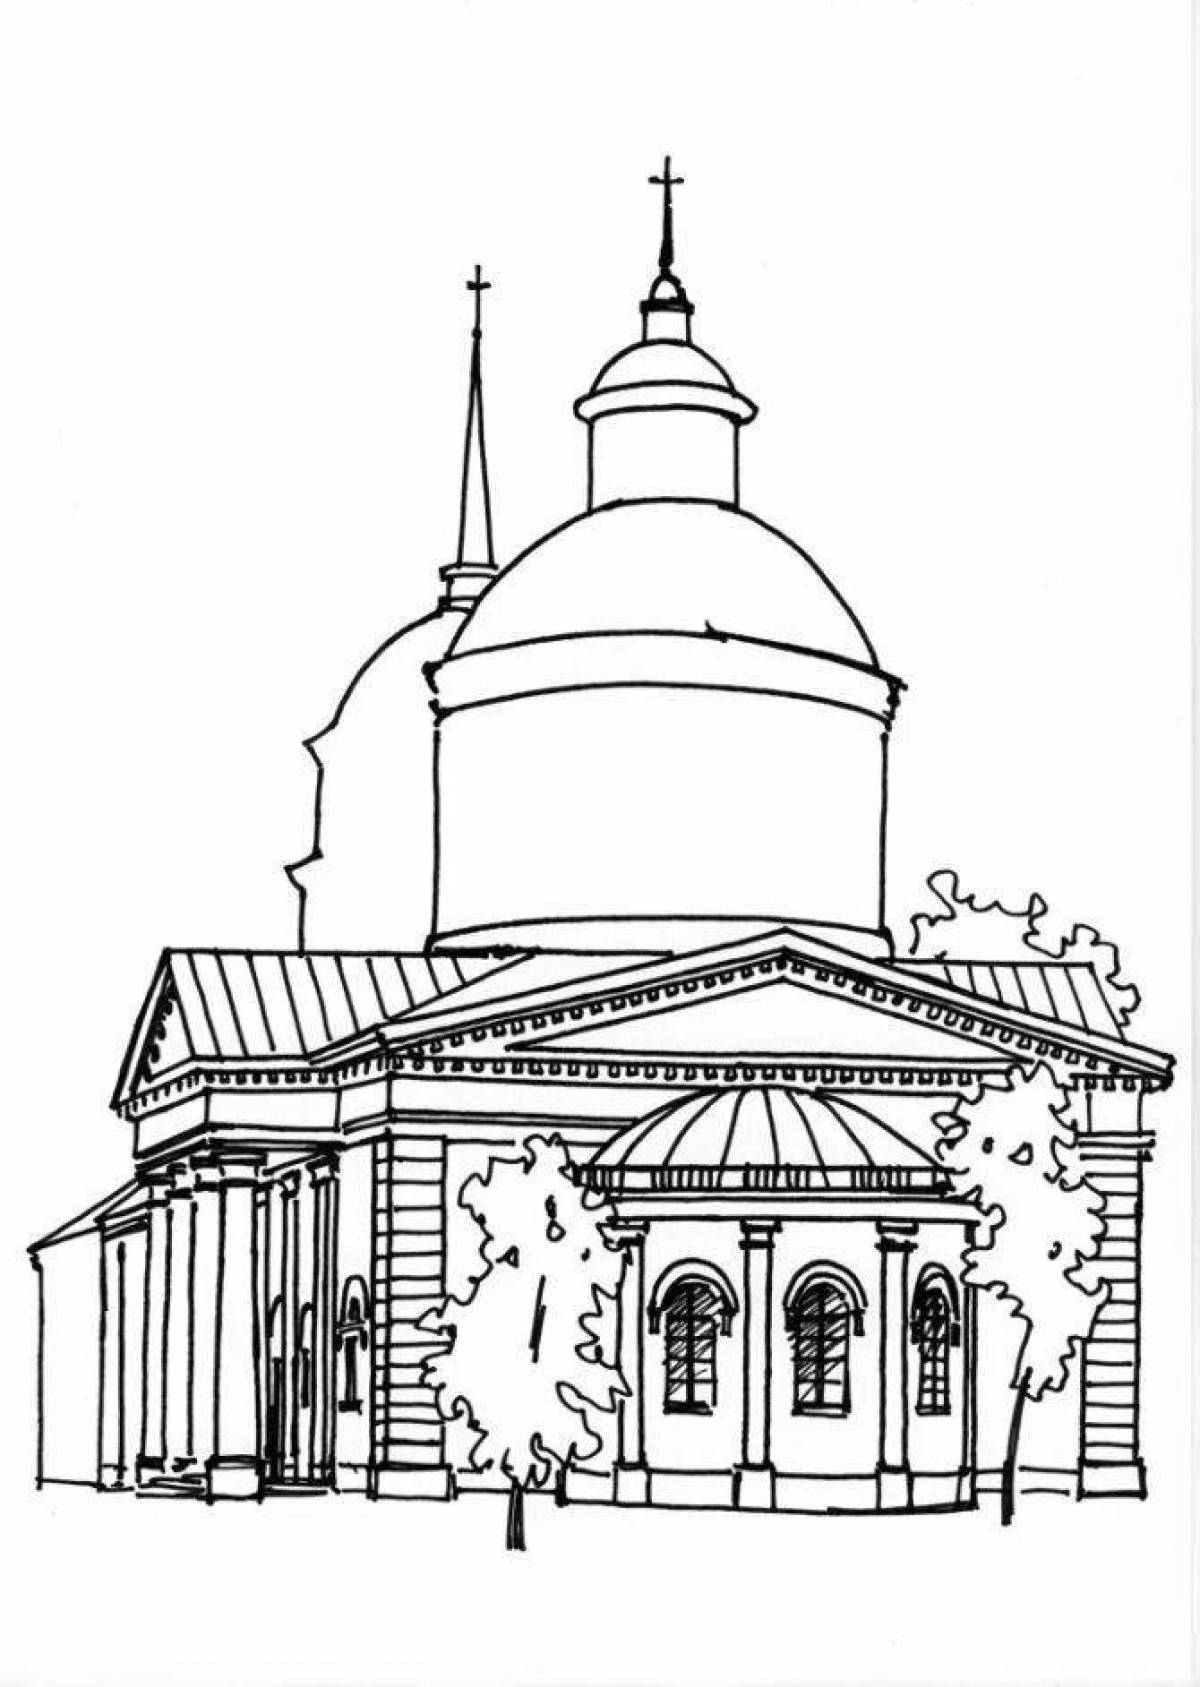 Coloring page charming voronezh